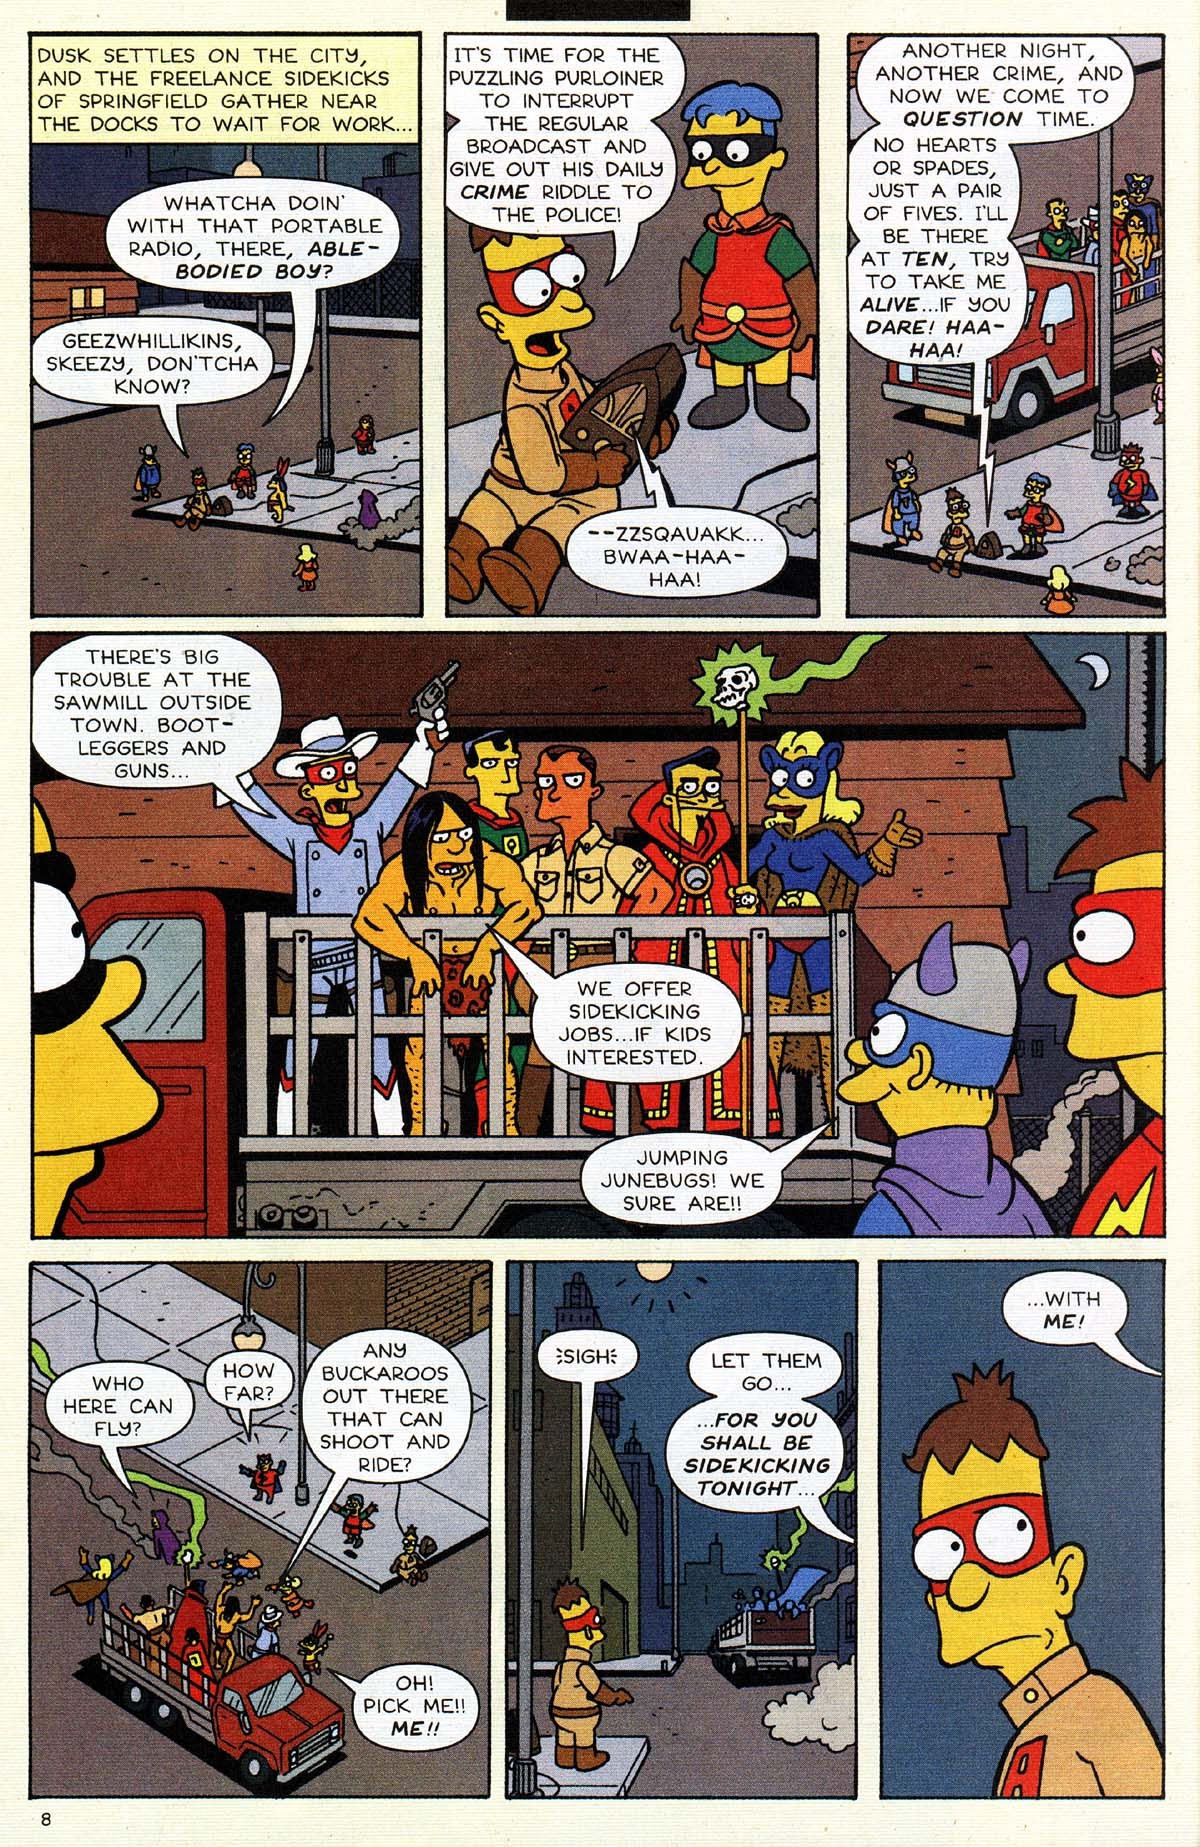 Read online Bart Simpson comic -  Issue #17 - 10